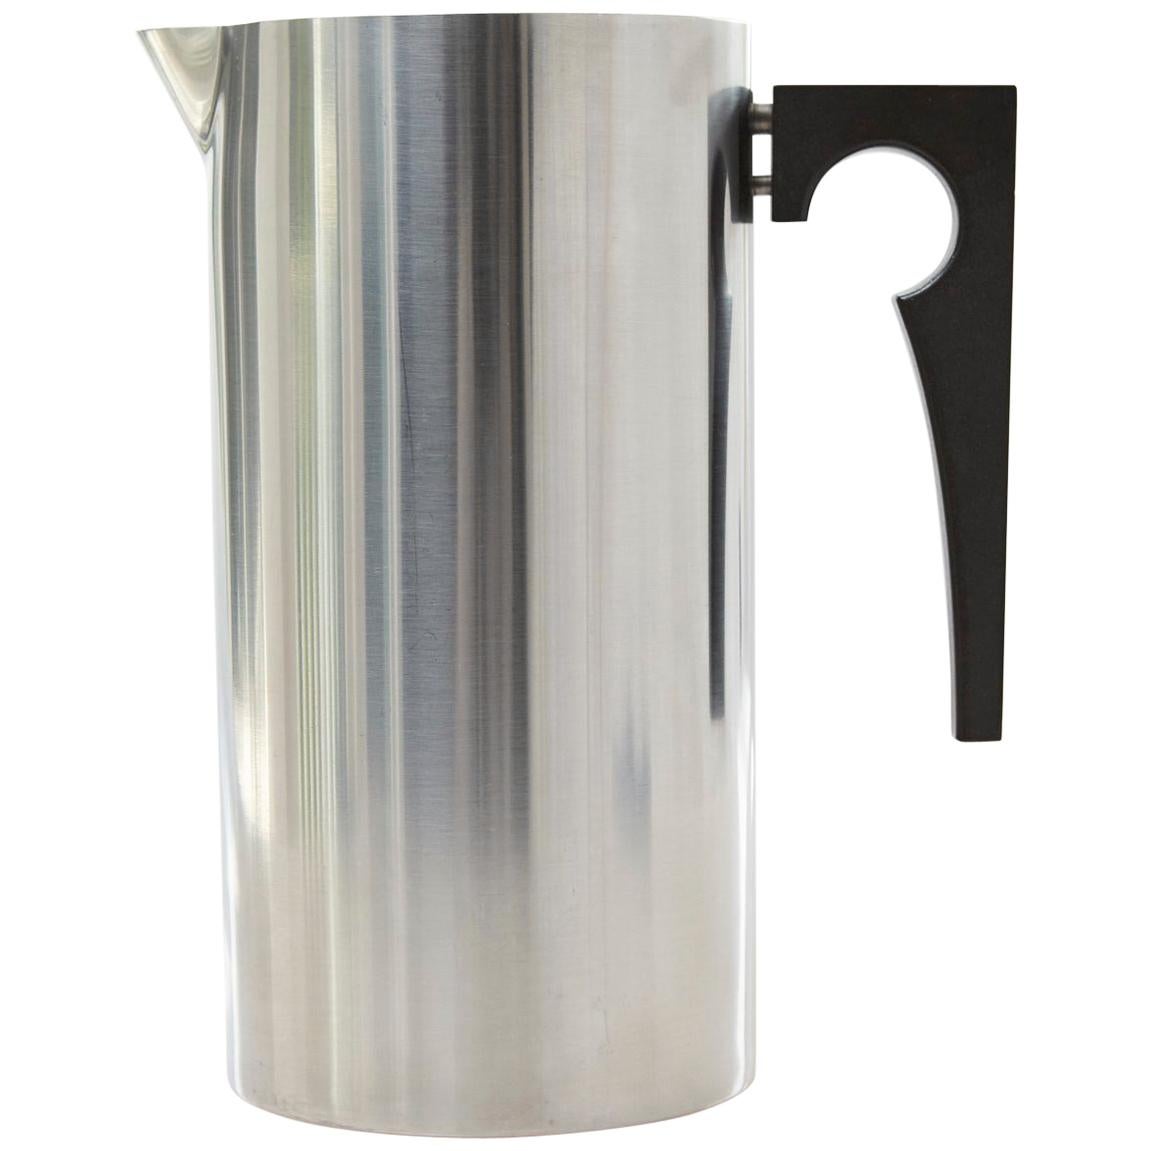 Stainless Steel Pitcher with Ice Lip, Cylinda Line by Arne Jacobsen for Stelton